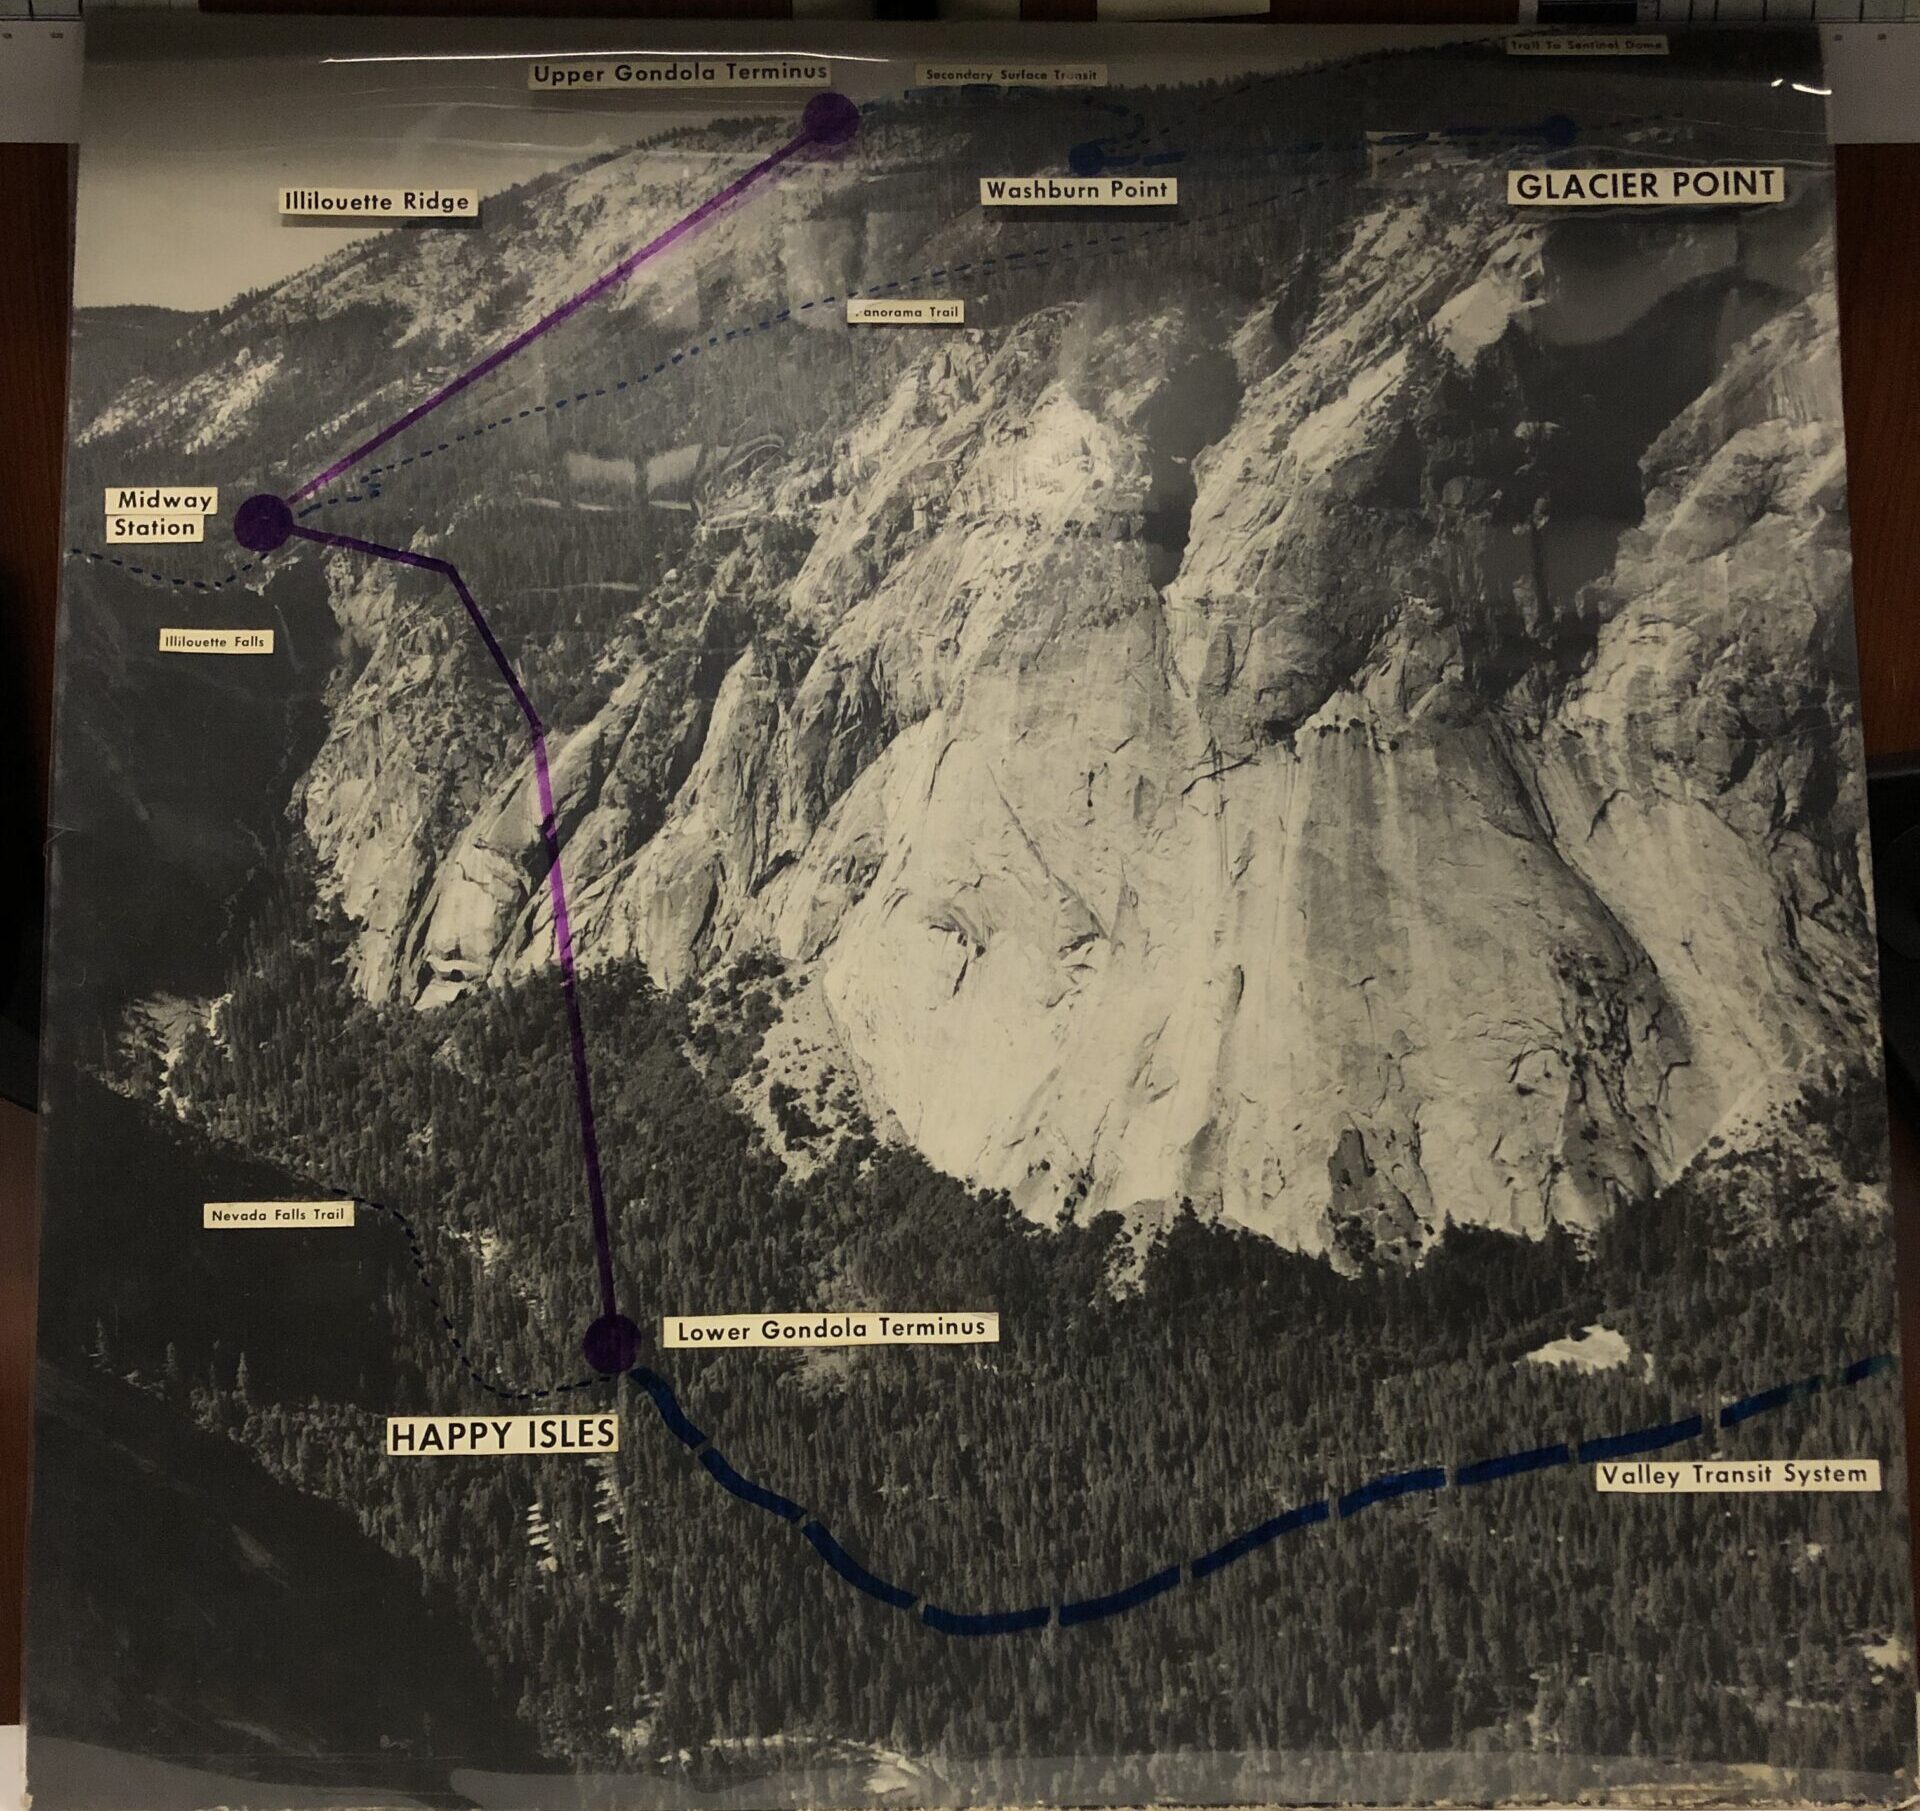 Alternate histories in Yosemite: the proposed route of the Glacier Point gondola, which would have left from Happy Isles to a midway station at Illilouette Falls and ended at the Glacier Point Hotel.